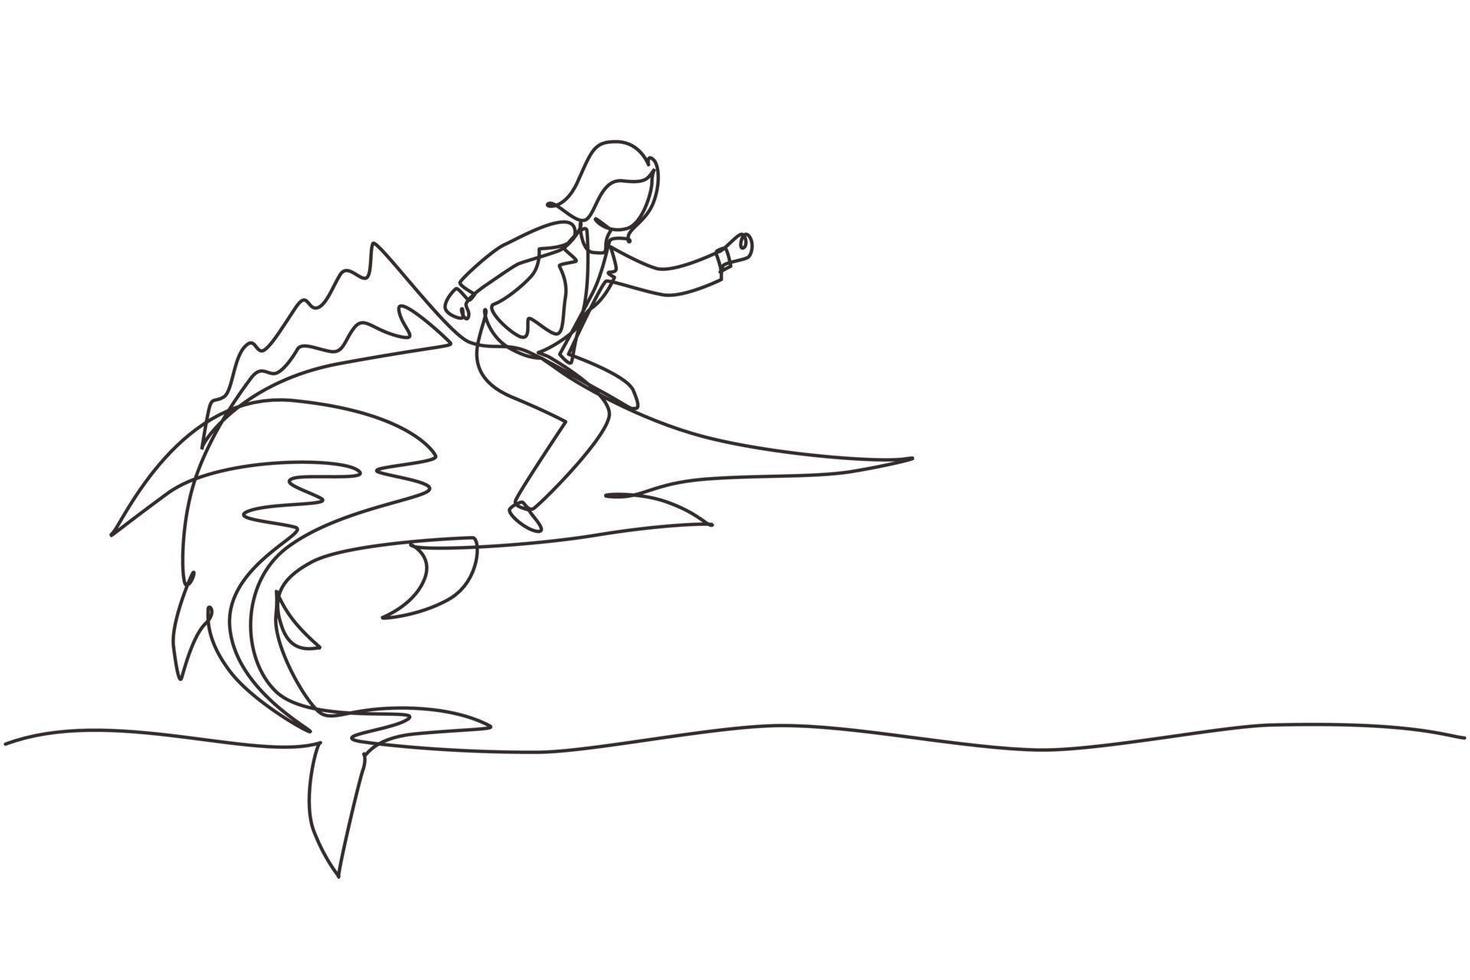 Single continuous line drawing brave businesswoman riding huge dangerous marlin fish. Professional entrepreneur female character fight with predator. One line draw graphic design vector illustration